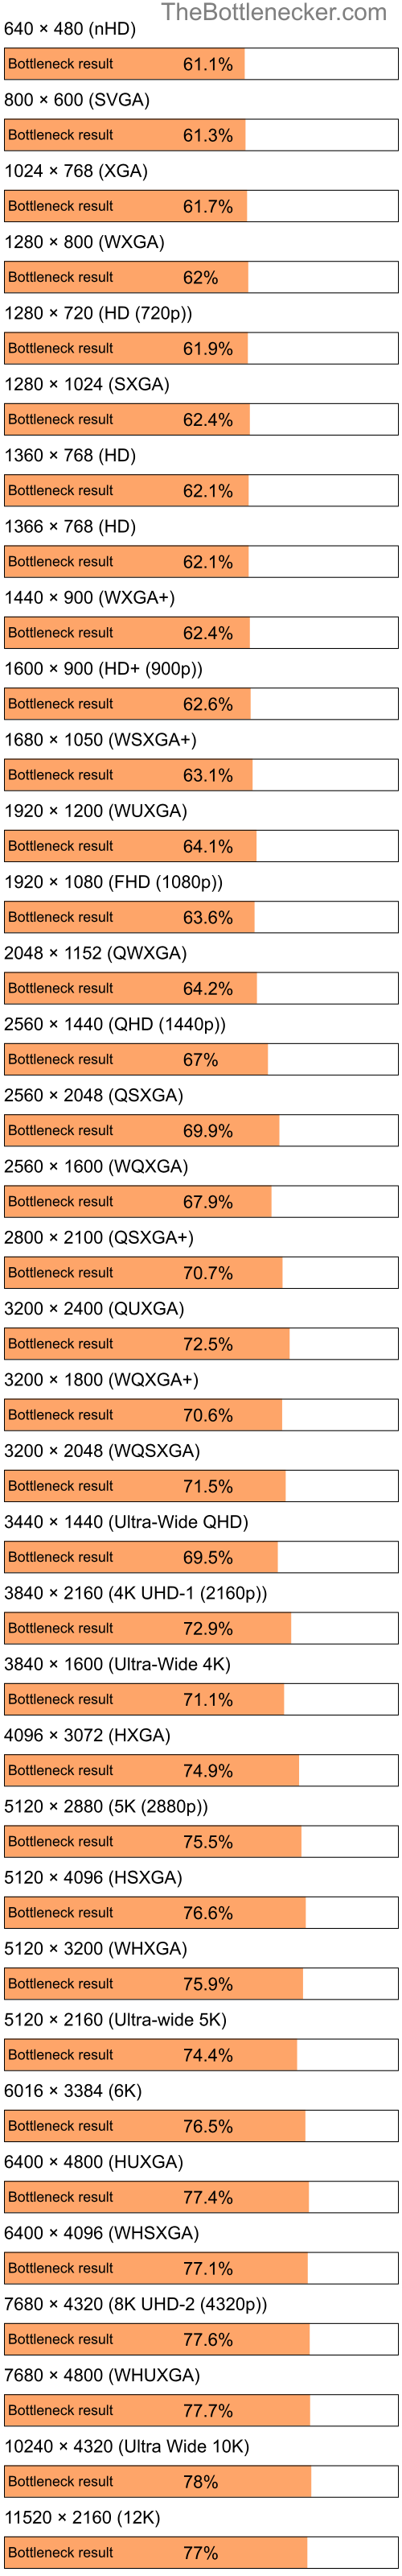 Bottleneck results by resolution for Intel Celeron and NVIDIA Quadro FX 550 in Processor Intense Tasks